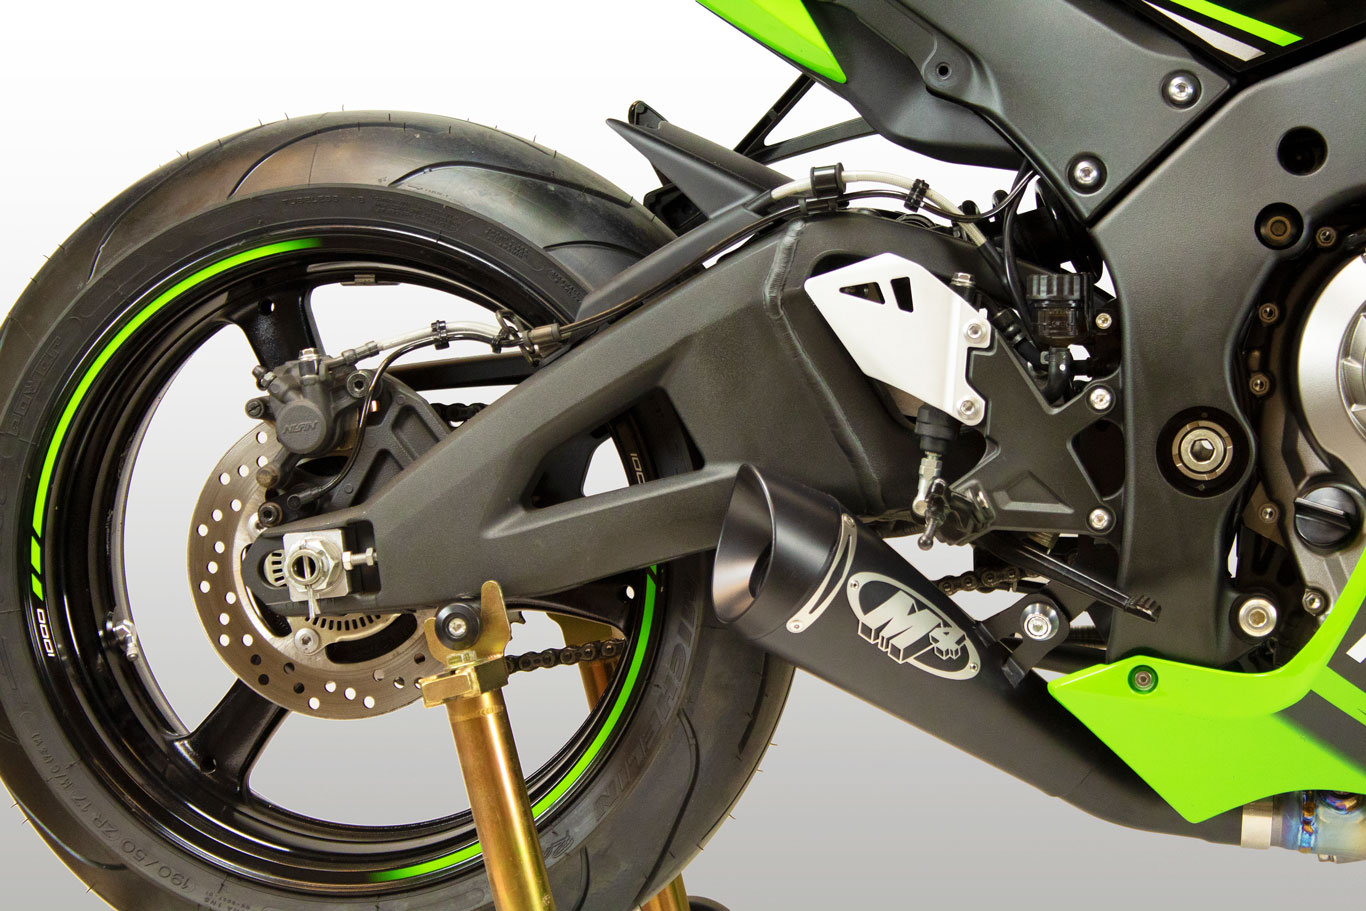 Black GP19 Slip On Exhaust - For 16-20 Kawasaki ZX10R - Click Image to Close